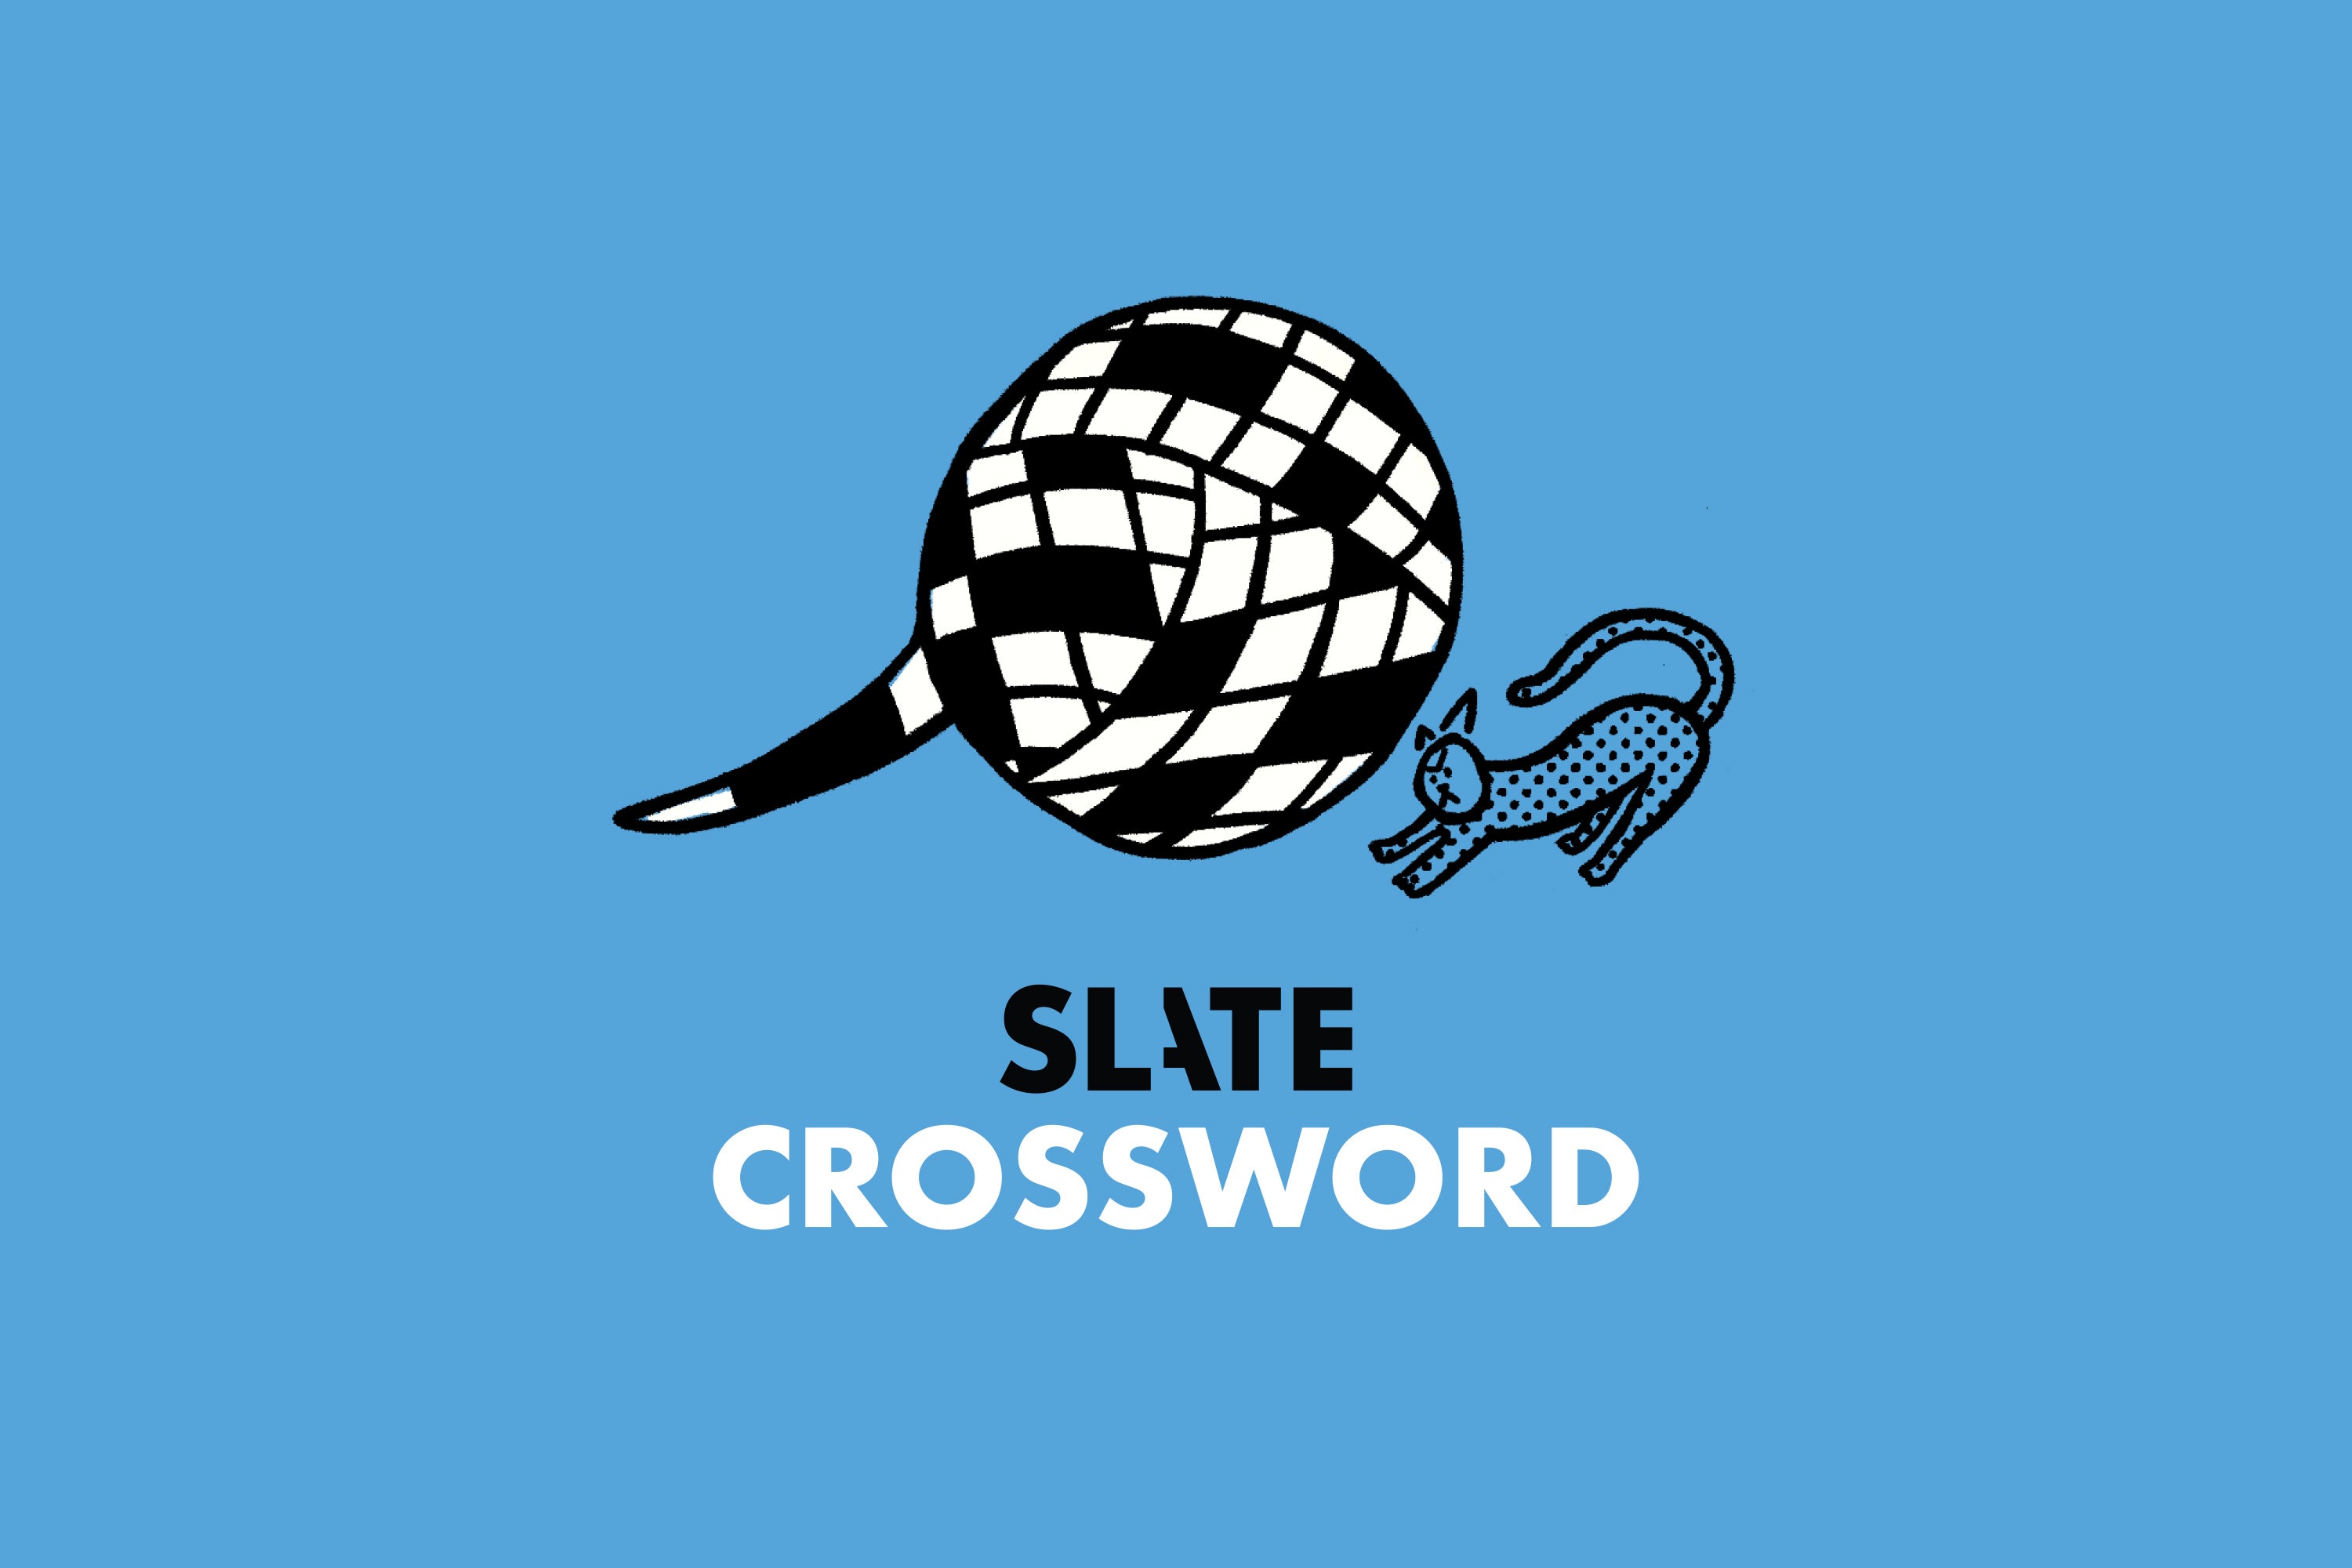 Slate Crossword: Dung Beetle That Was Worshipped in Ancient Egypt (Six Letters)